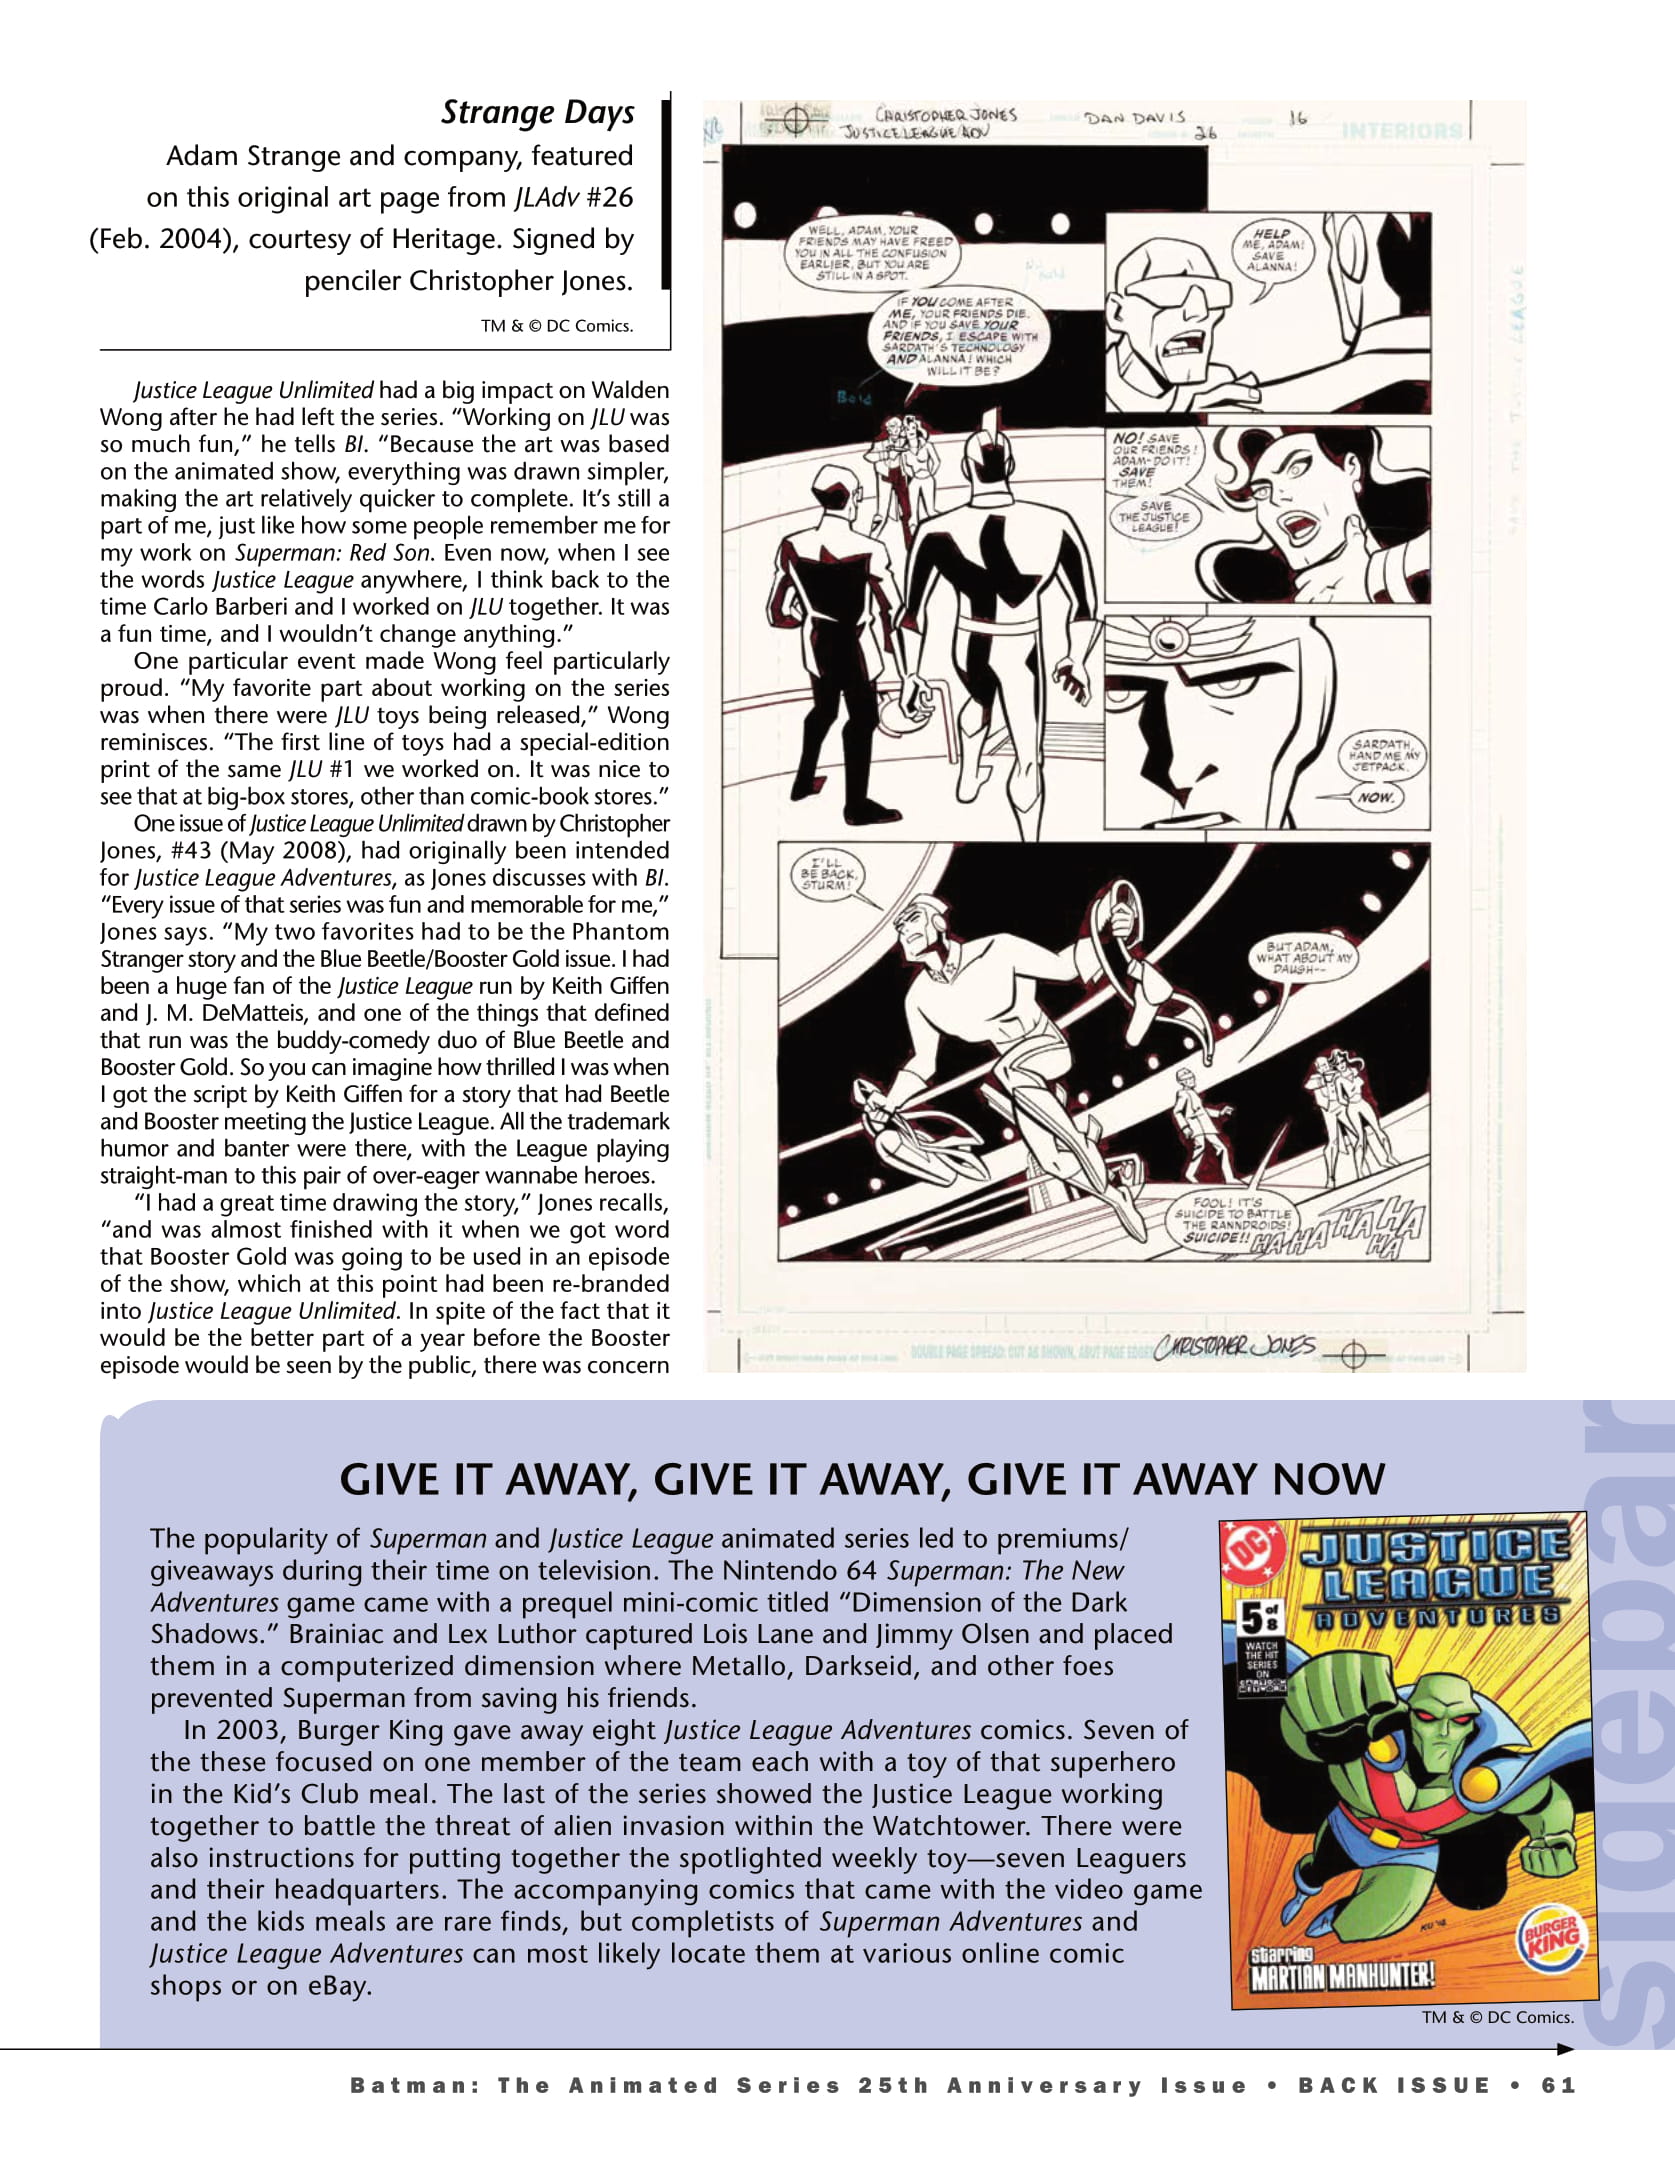 Read online Back Issue comic -  Issue #99 - 63